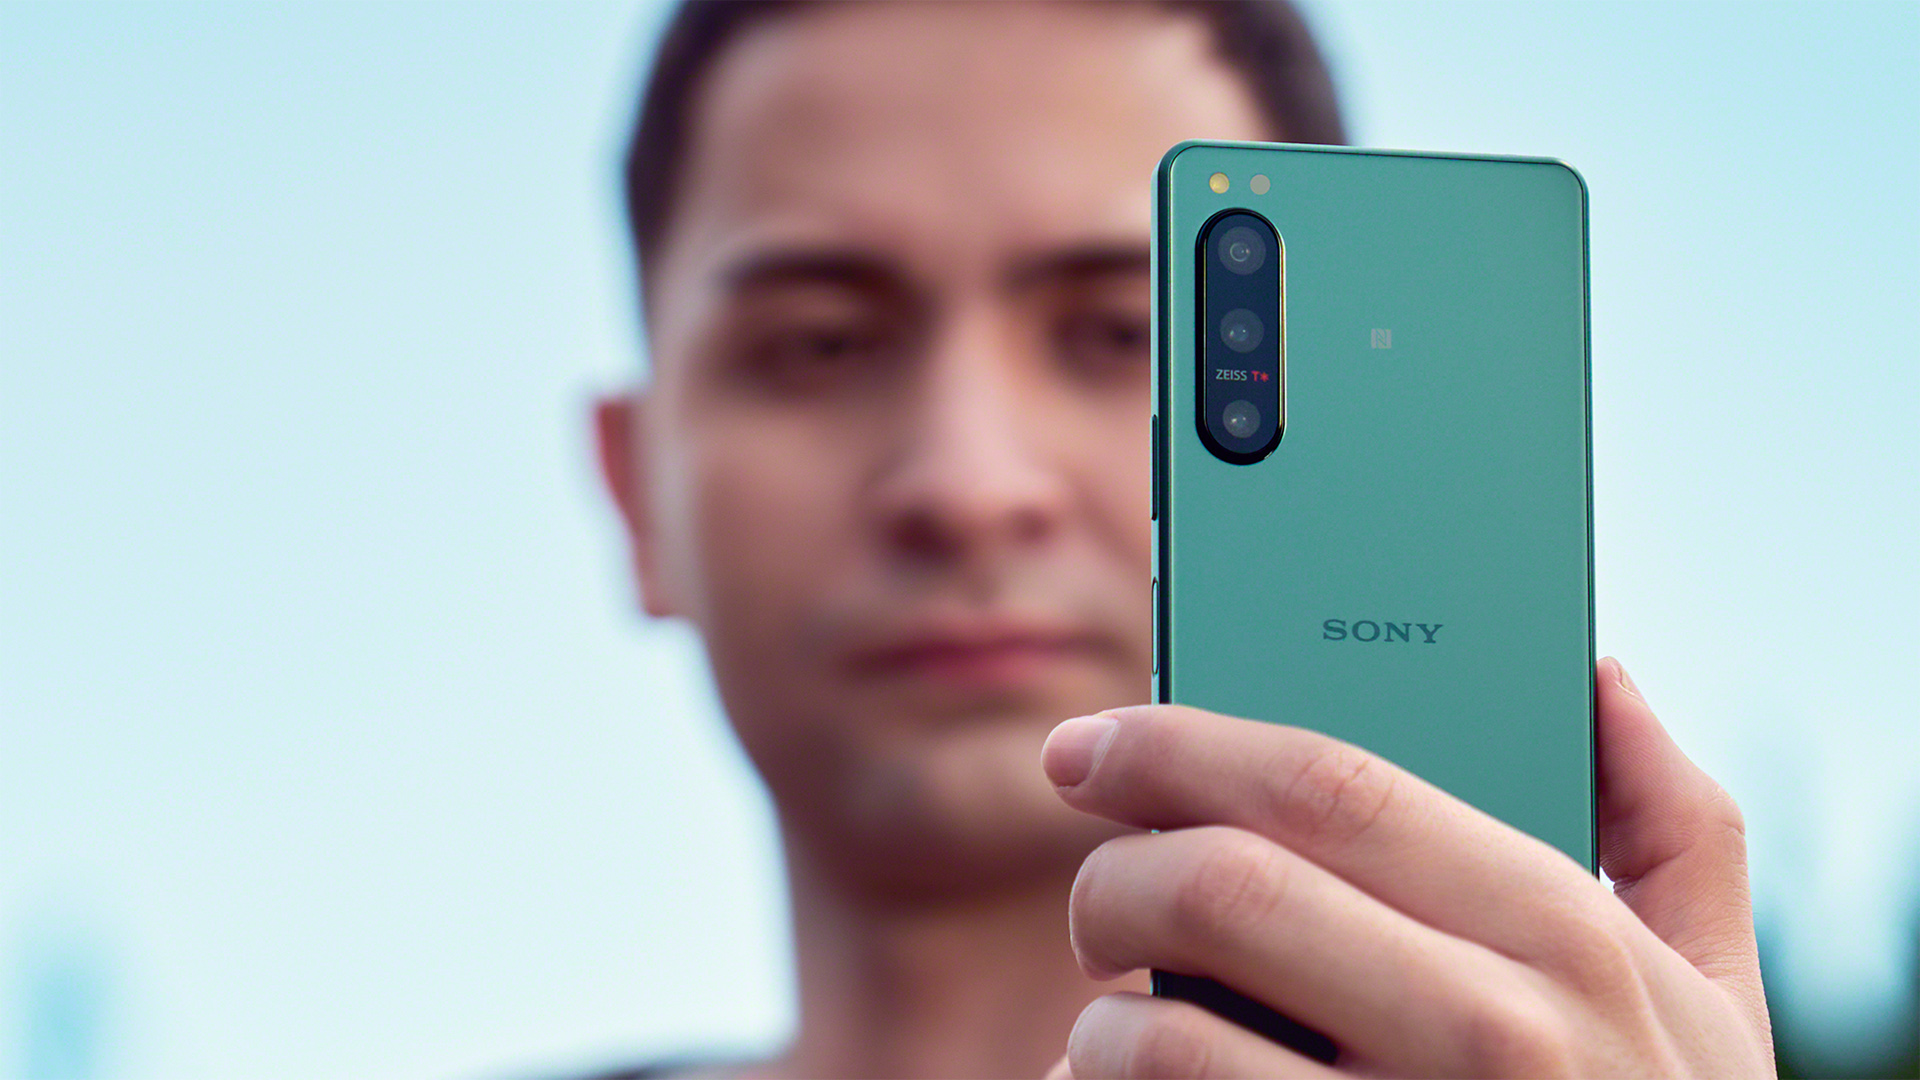 Sony Xperia 5 IV Introduced – 4K/120p On All Main Cameras